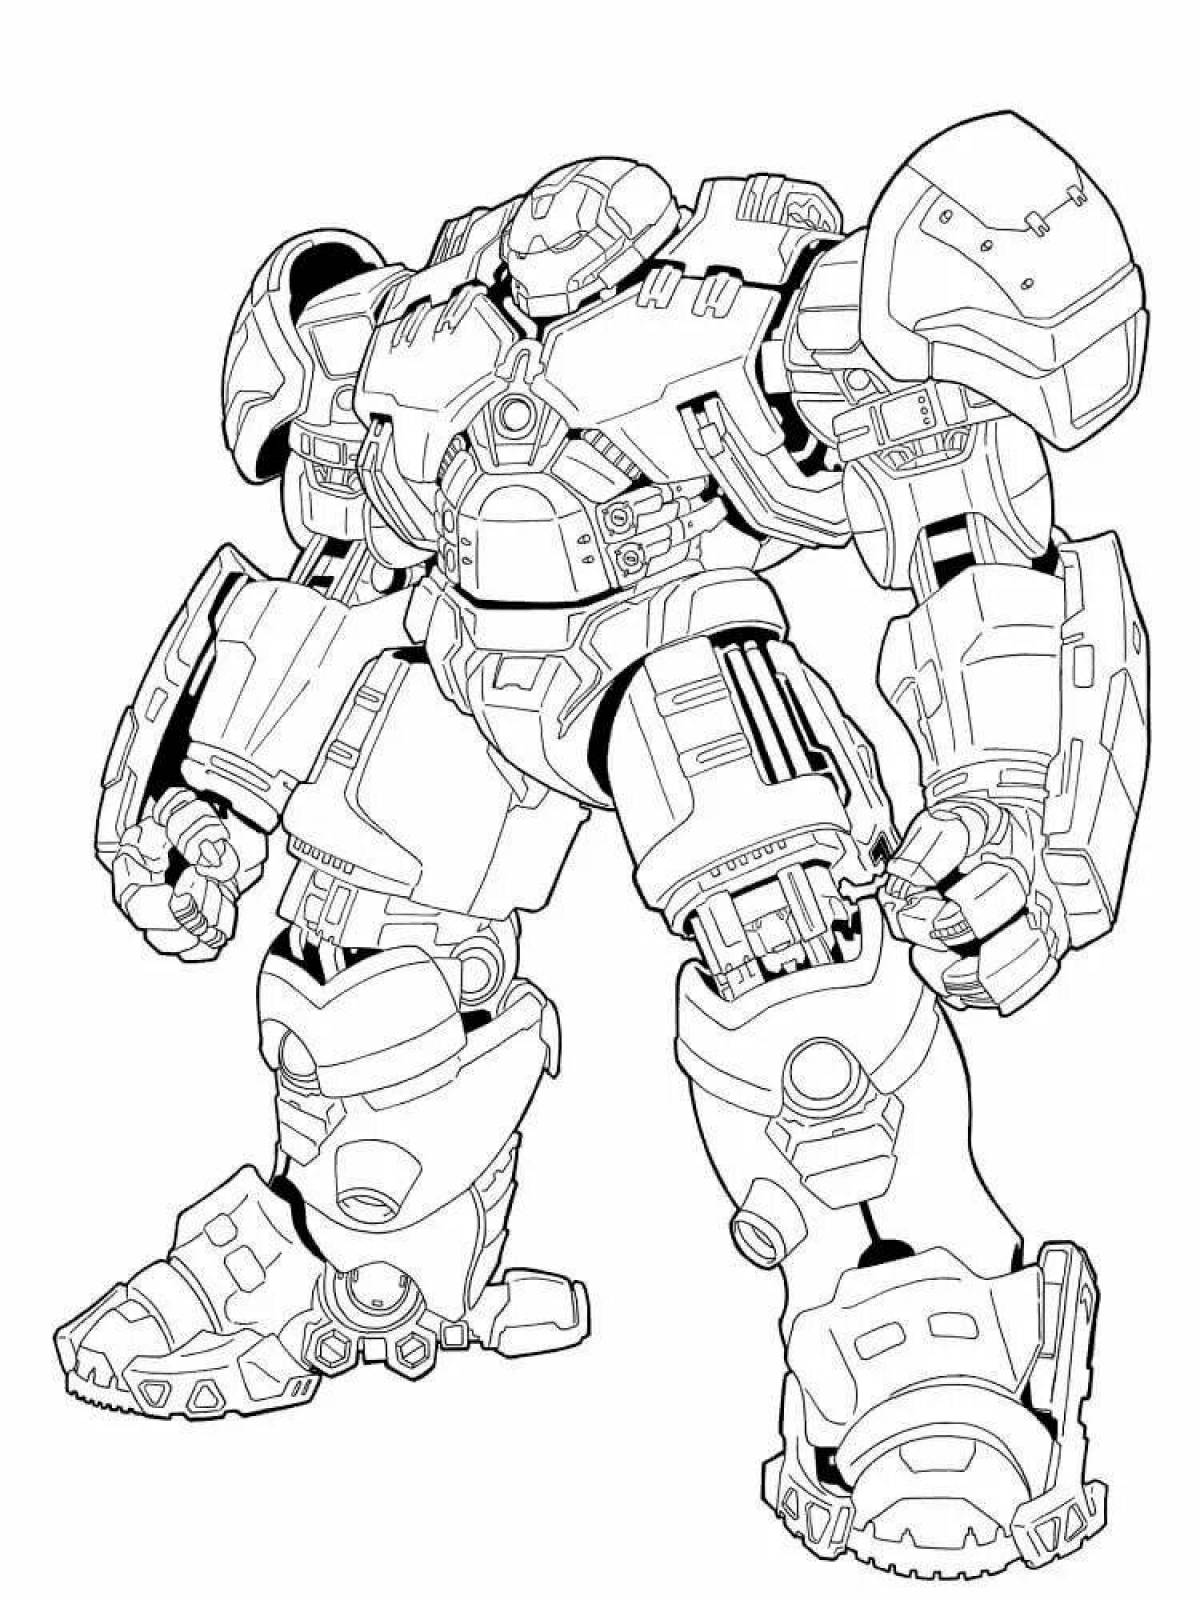 Coloring page refined iron patriot